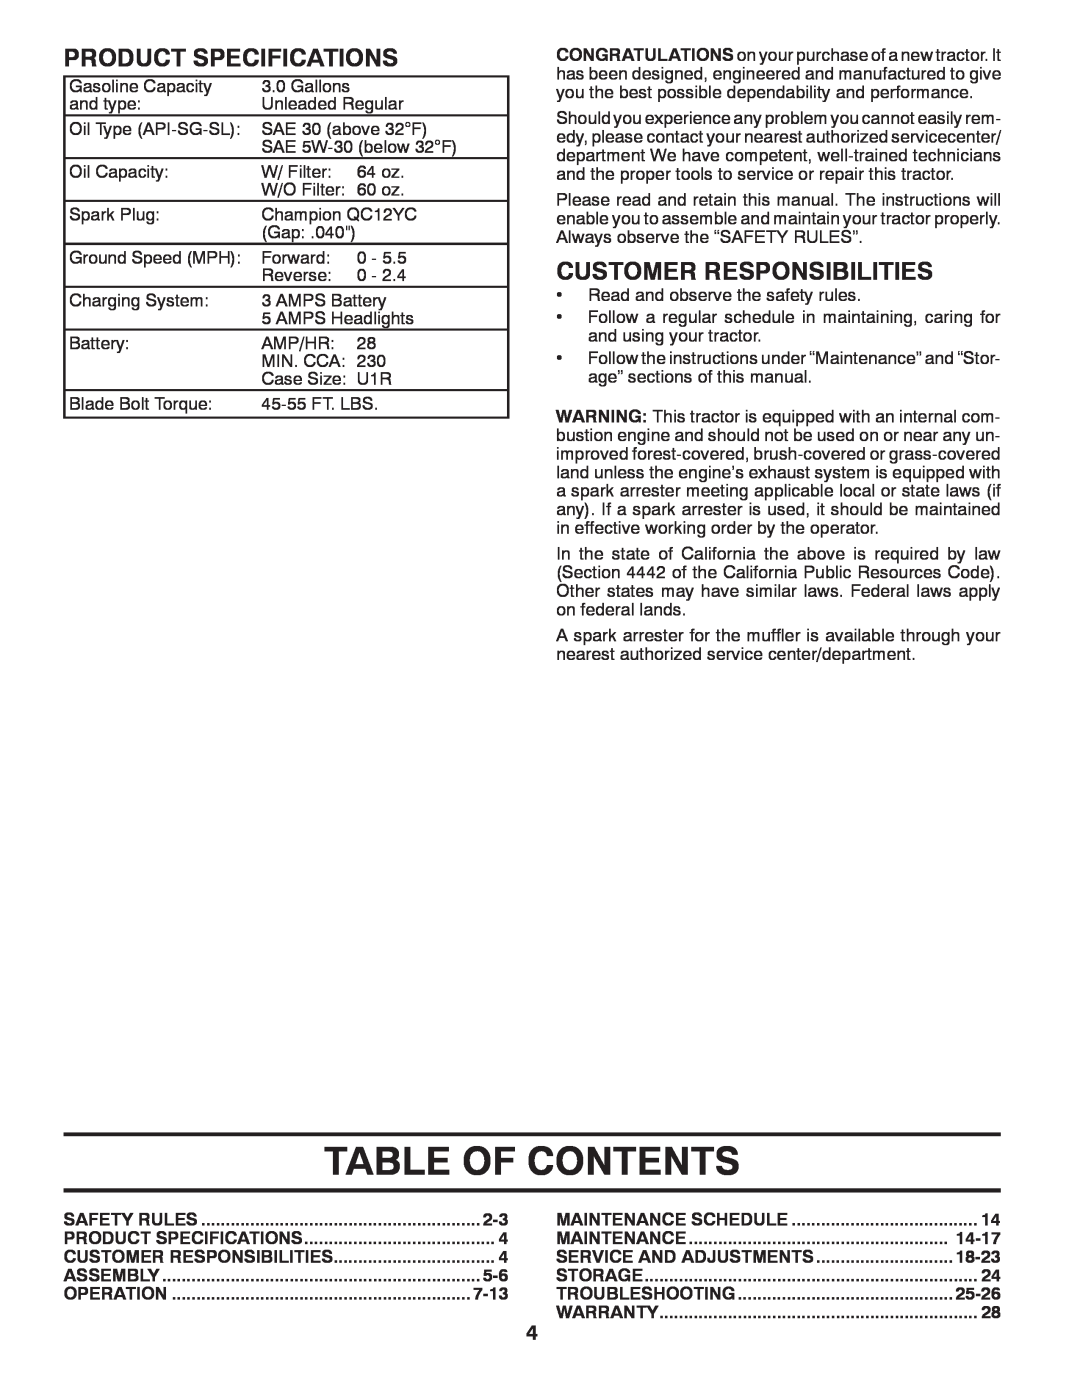 Poulan 532 43 85-70 manual Table Of Contents, Product Specifications, Customer Responsibilities, 7-13, 14-17, 18-23, 25-26 